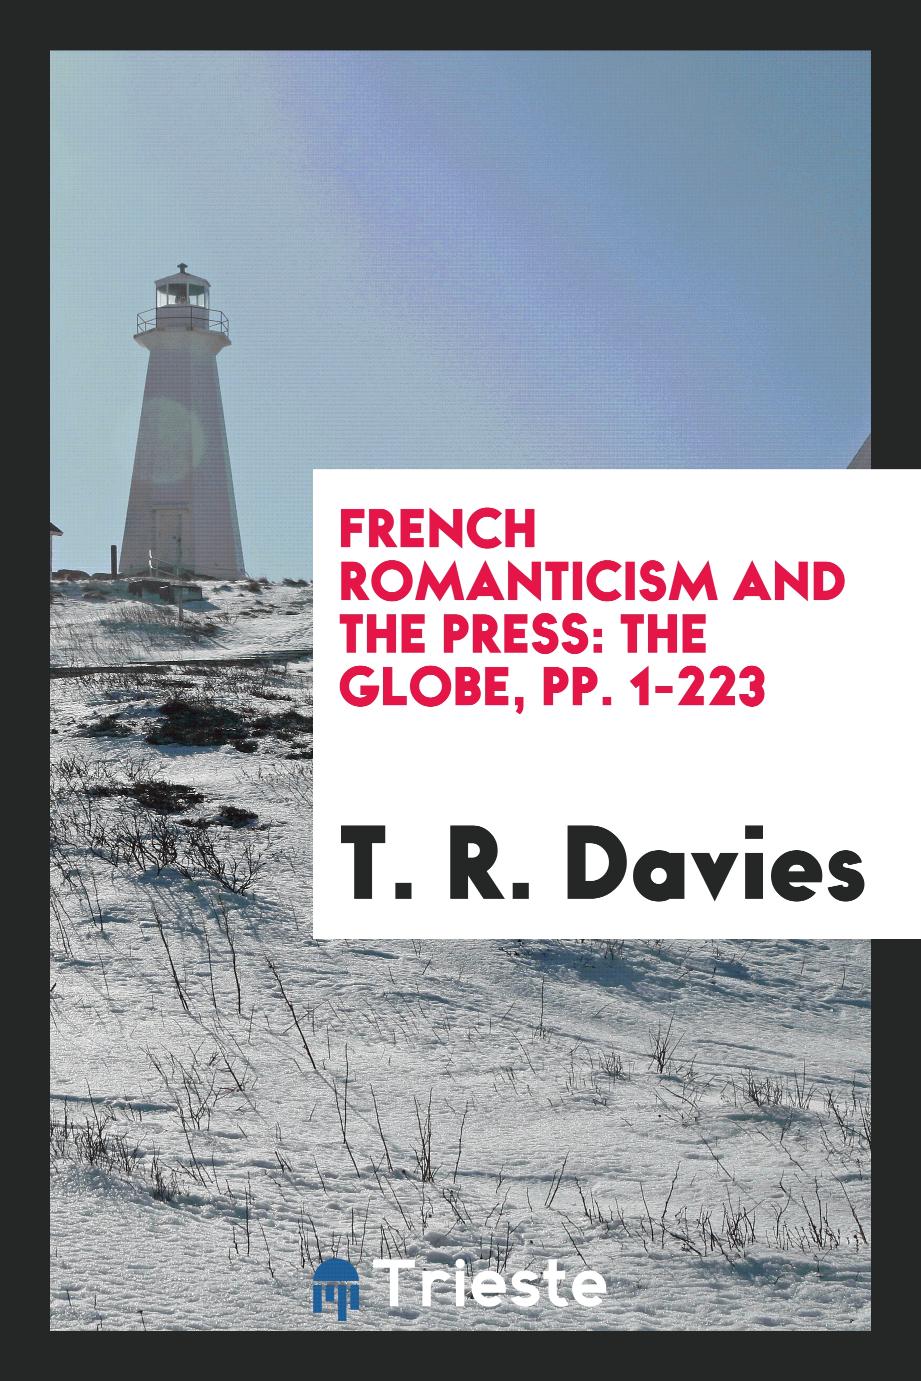 French Romanticism and the Press: The Globe, pp. 1-223